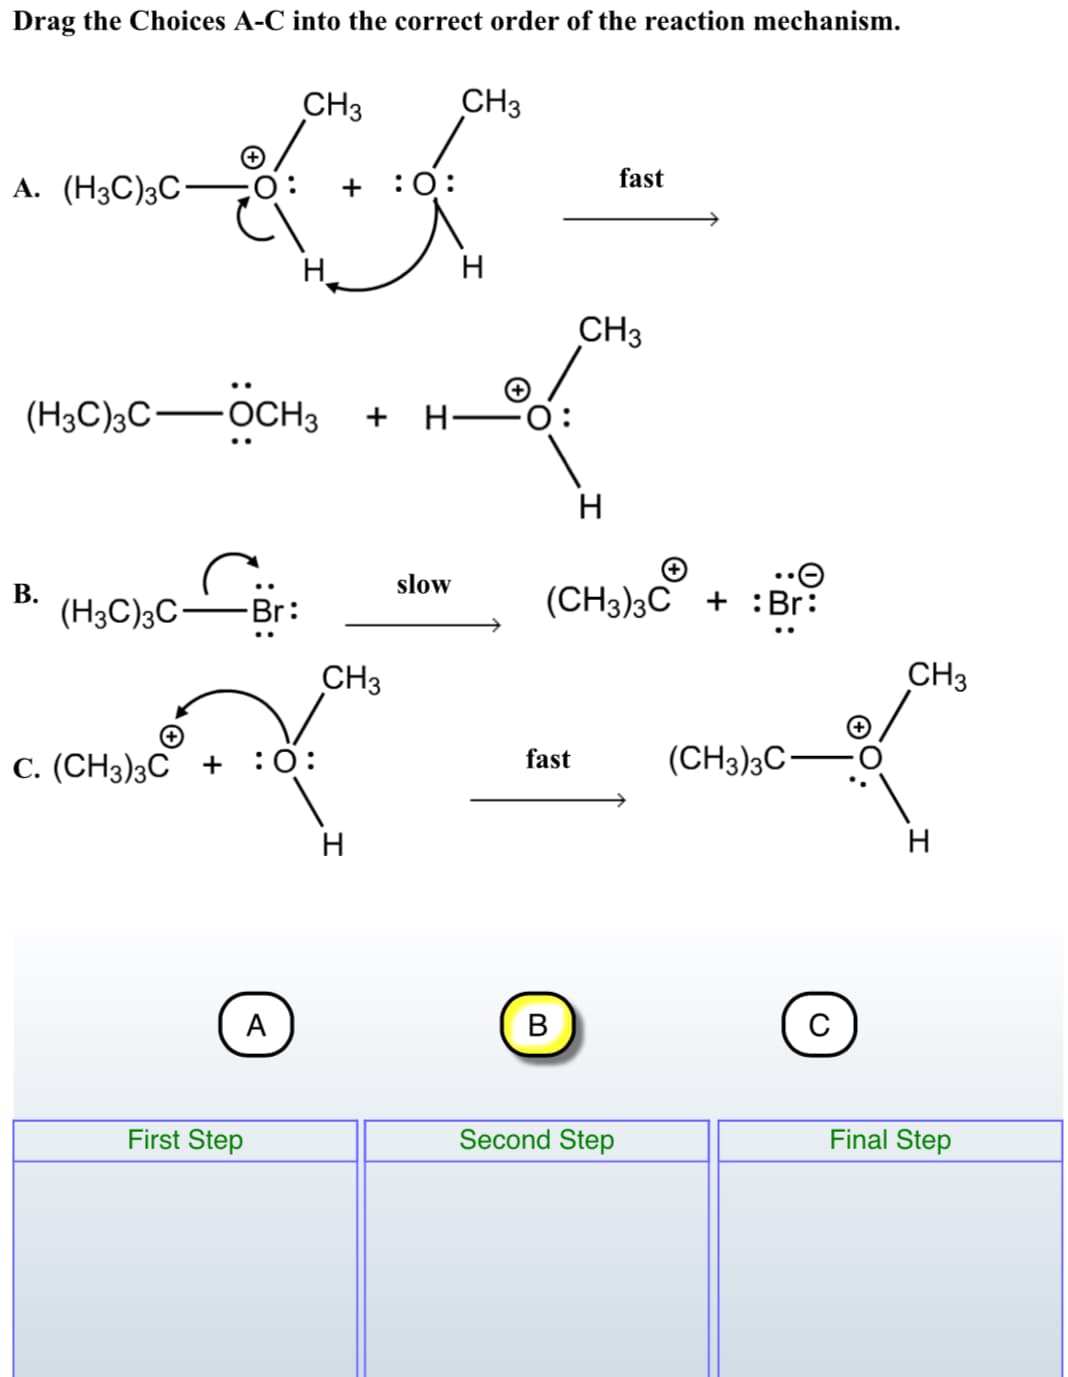 Drag the Choices A-C into the correct order of the reaction mechanism.
CH3
CH3
A. (H3C)3C-
:0:
fast
+
CH3
(H3C)3C OCCH3
H F0
H
slow
В.
(H3C)3C-
(CH3)3C + :Br:
Br:
CH3
CH3
С. (CН3)3С +
:0:
fast
(CH3)3C-
H
A
В
First Step
Second Step
Final Step
